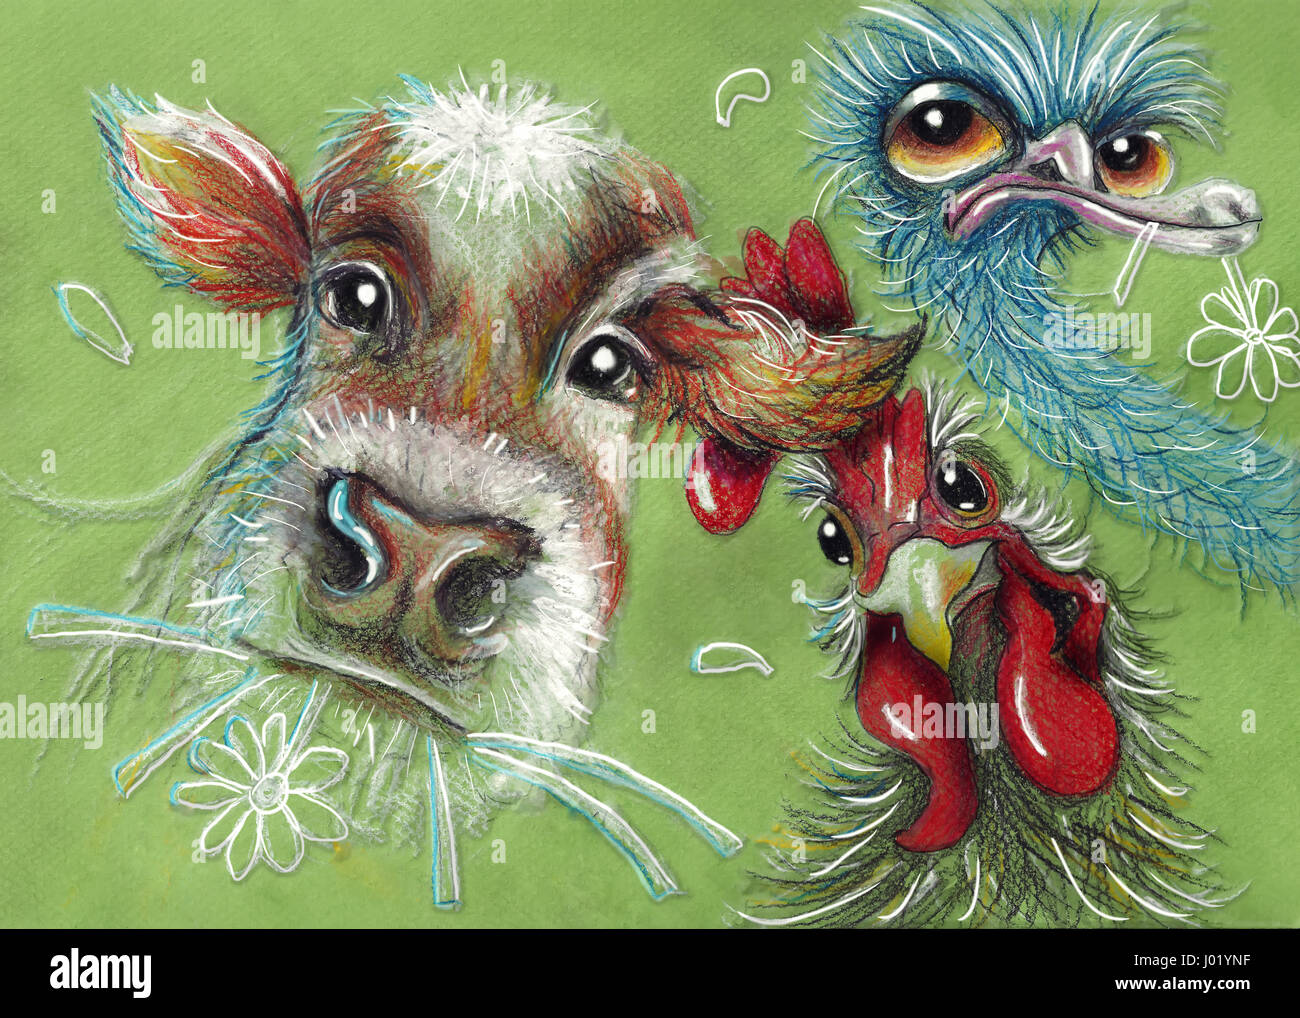 Cow, rooster and ostrich by Pencil drawing. Stock Photo